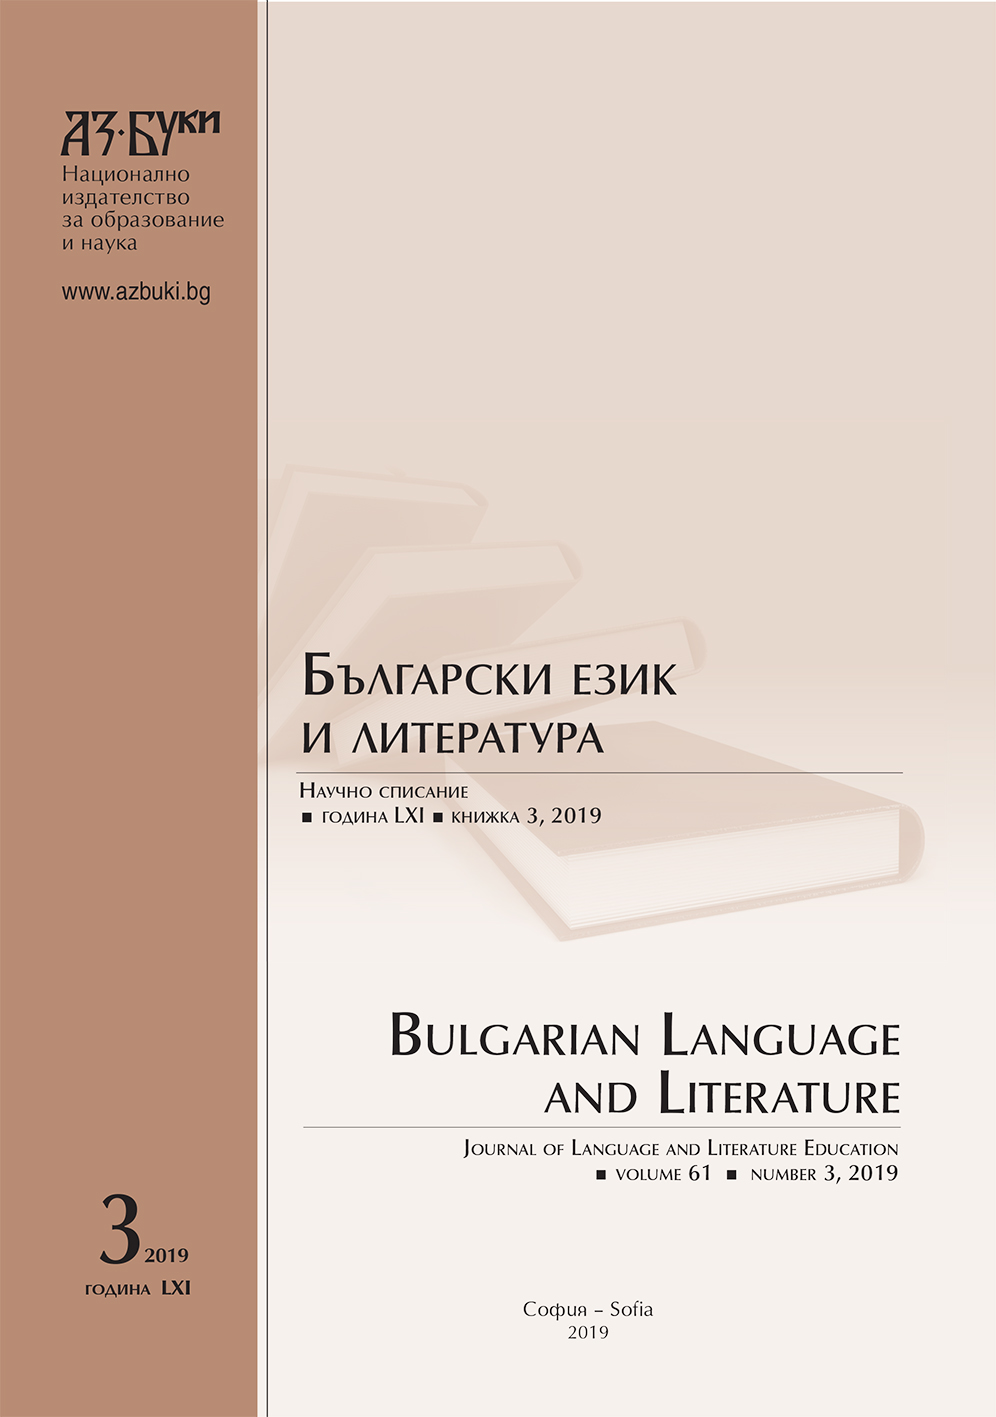 Interactive Approaches and Exercises used in the Bulgarian Language
Teacher‘s Practice for the Fifth Grade Cover Image